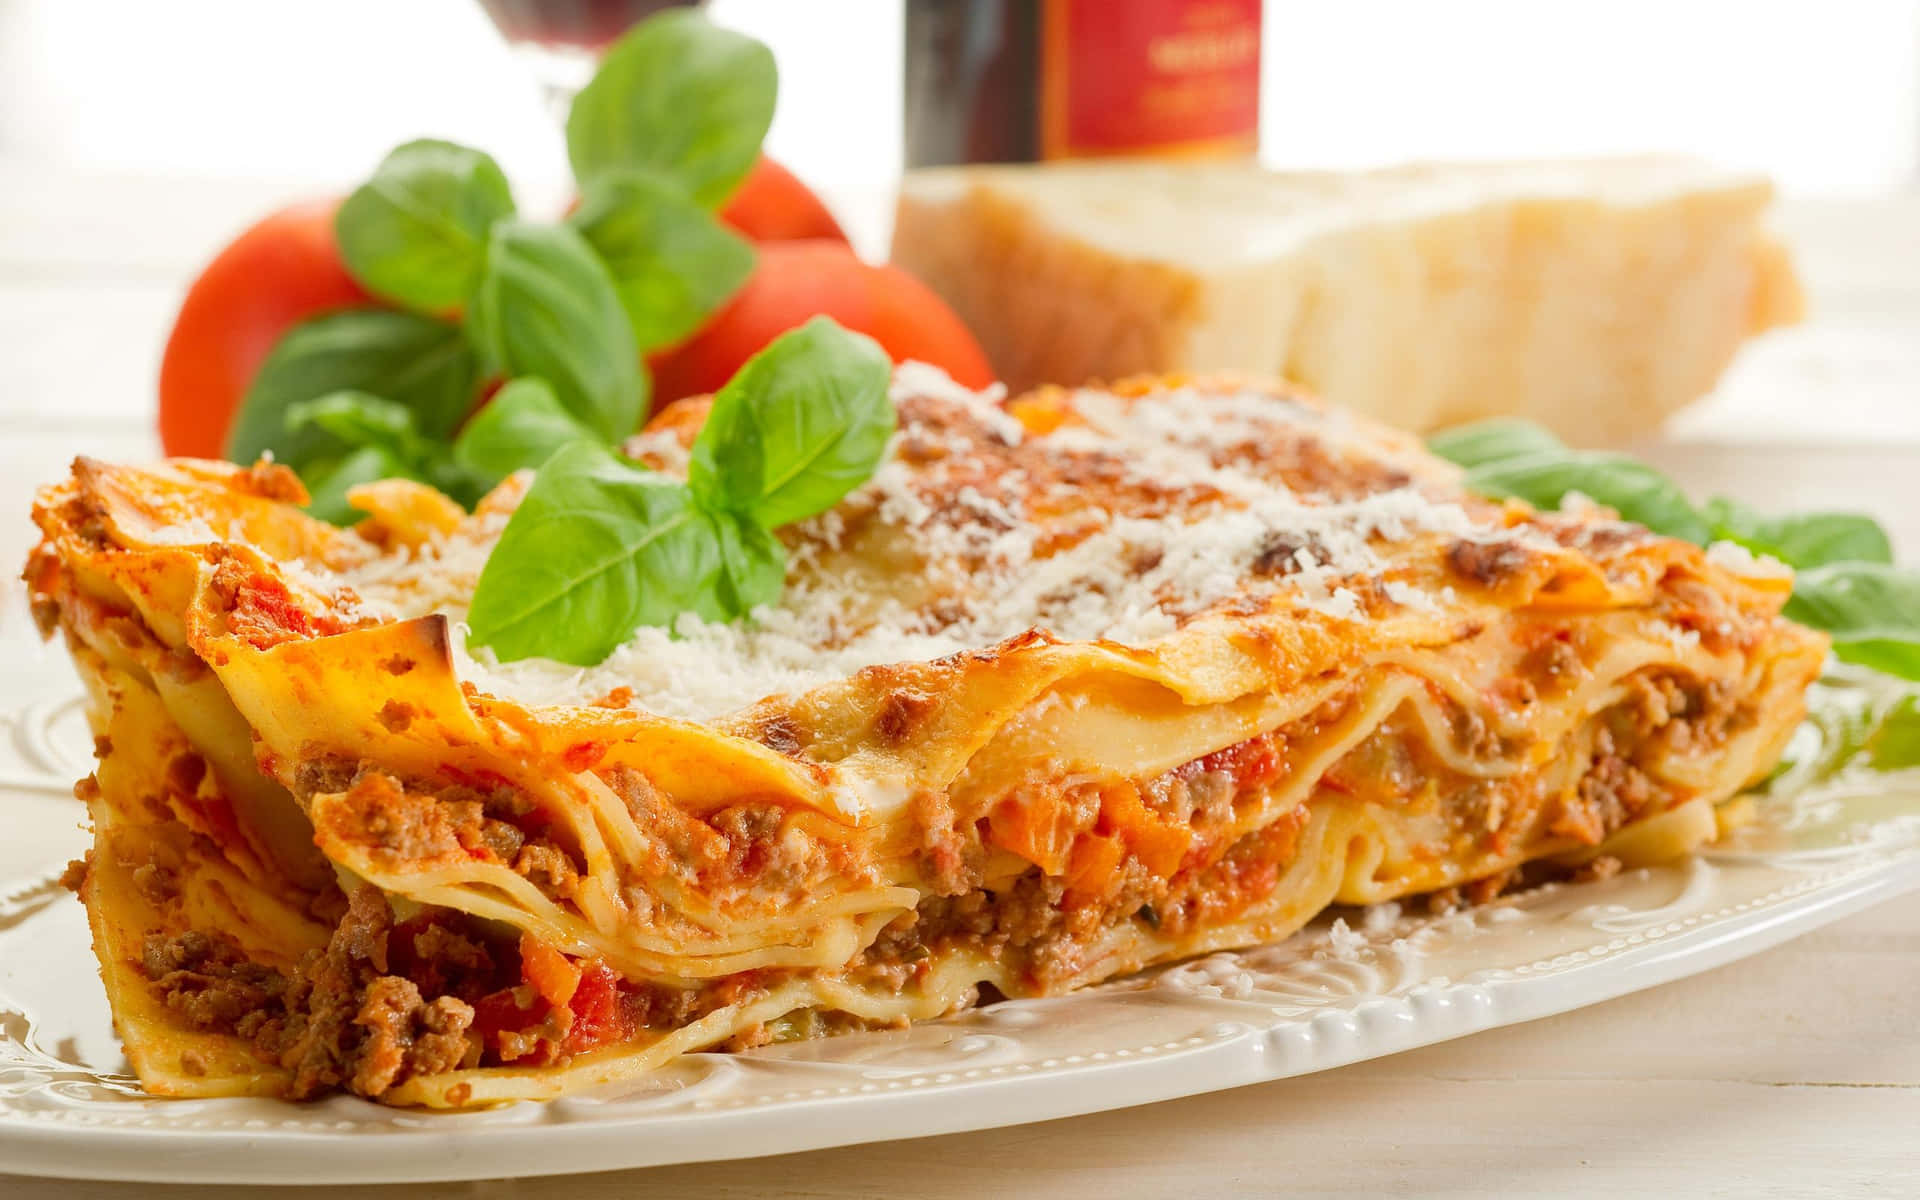 A Plate Of Lasagna With Meat And Vegetables